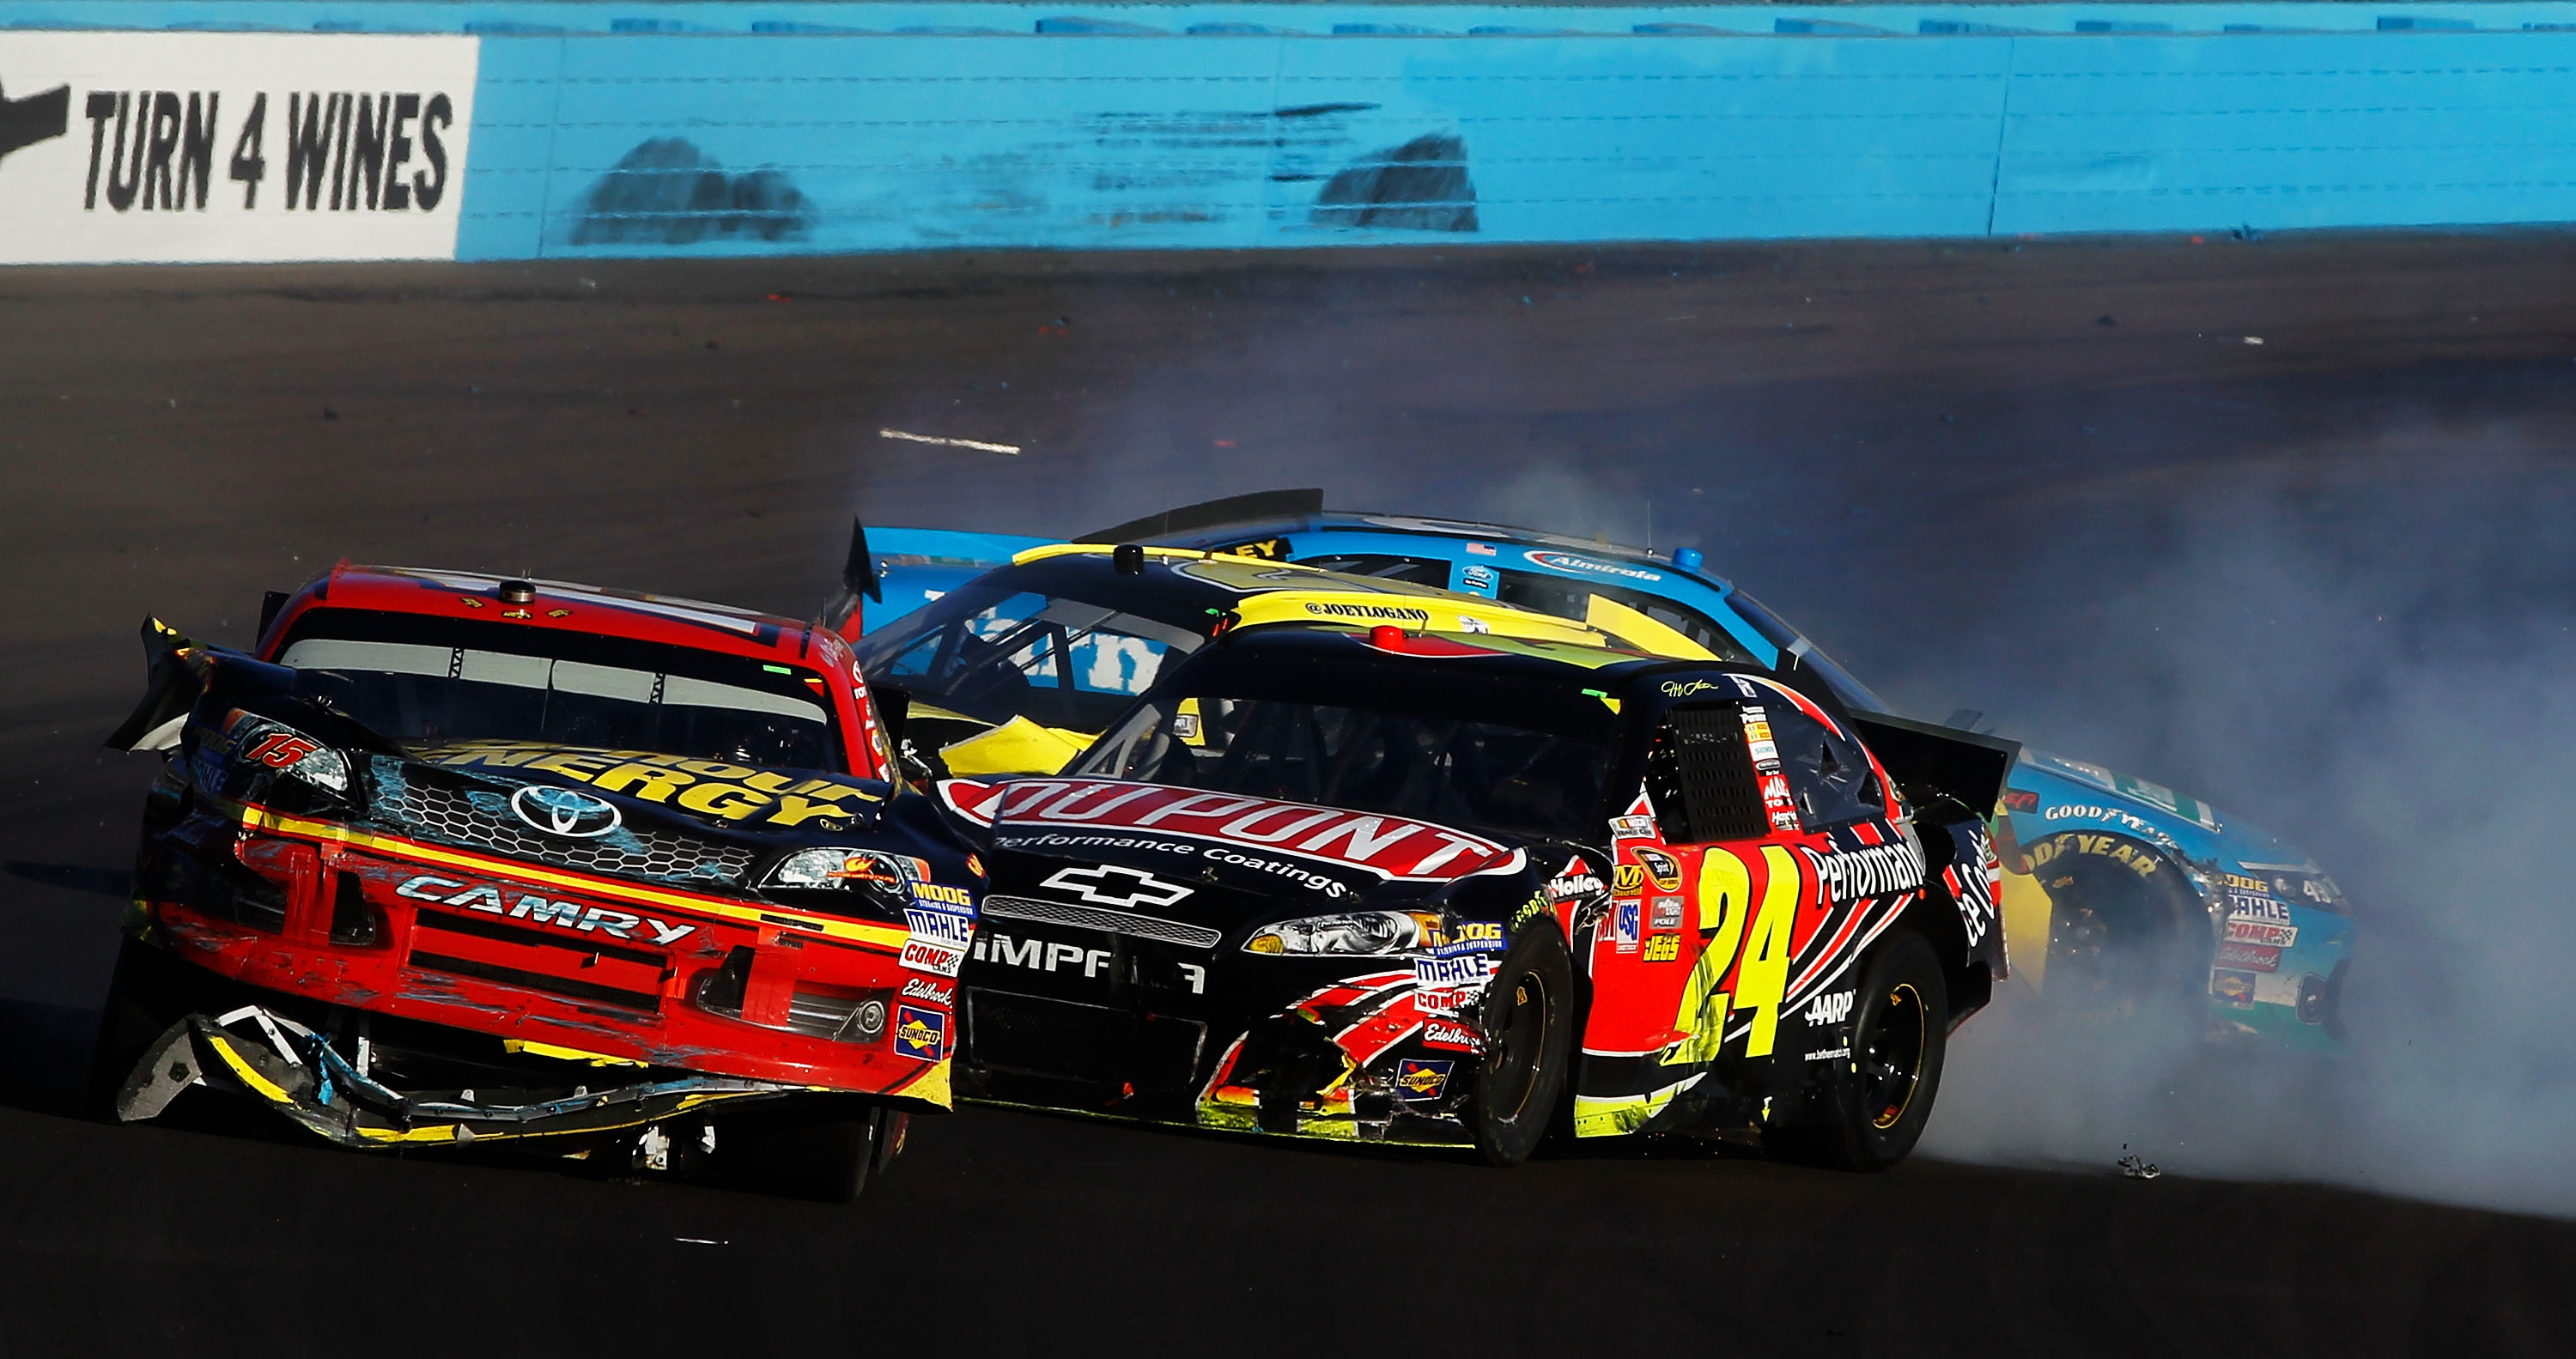 The win by Kevin Harvick was big.  The big points swing with Jimmie Johnson's trouble was huge.  But what everyone will remember about Phoenix is the pandemonium involving Jeff Gordon and Clint Bowyer.